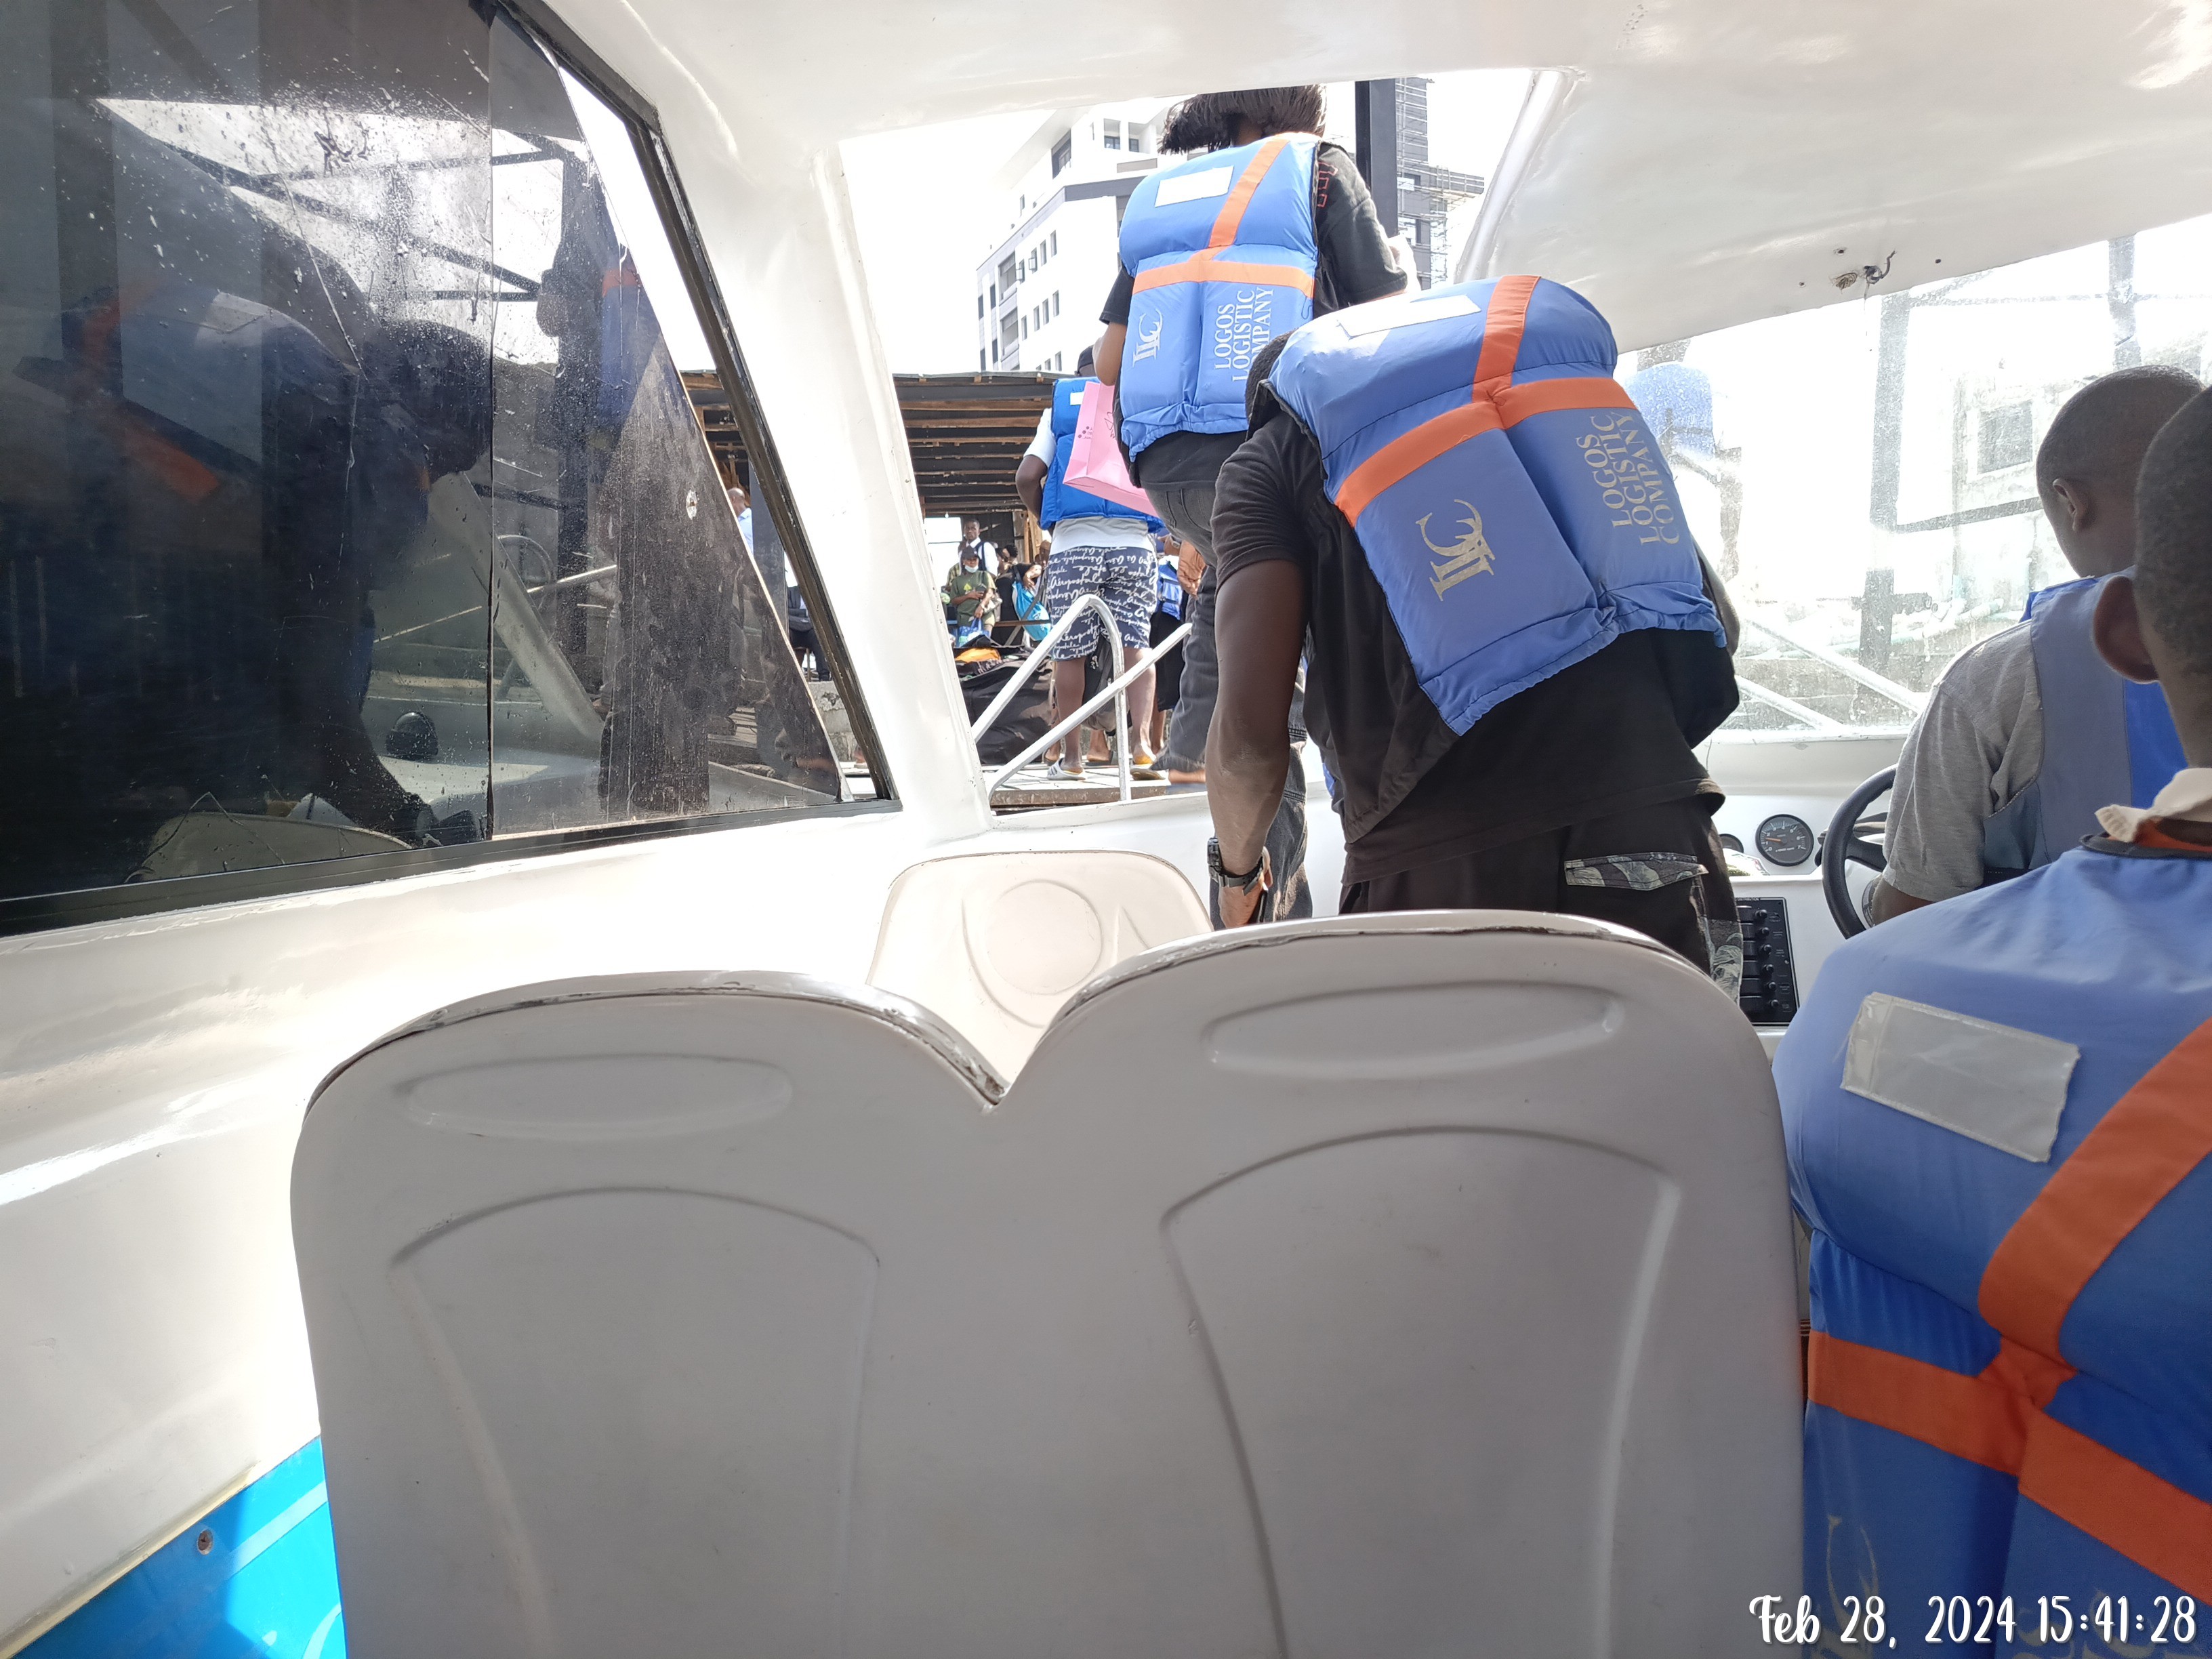 VIDEO: Lagos Boats Use Inaccurate Manifests, Risk Fraud, Passenger Safety